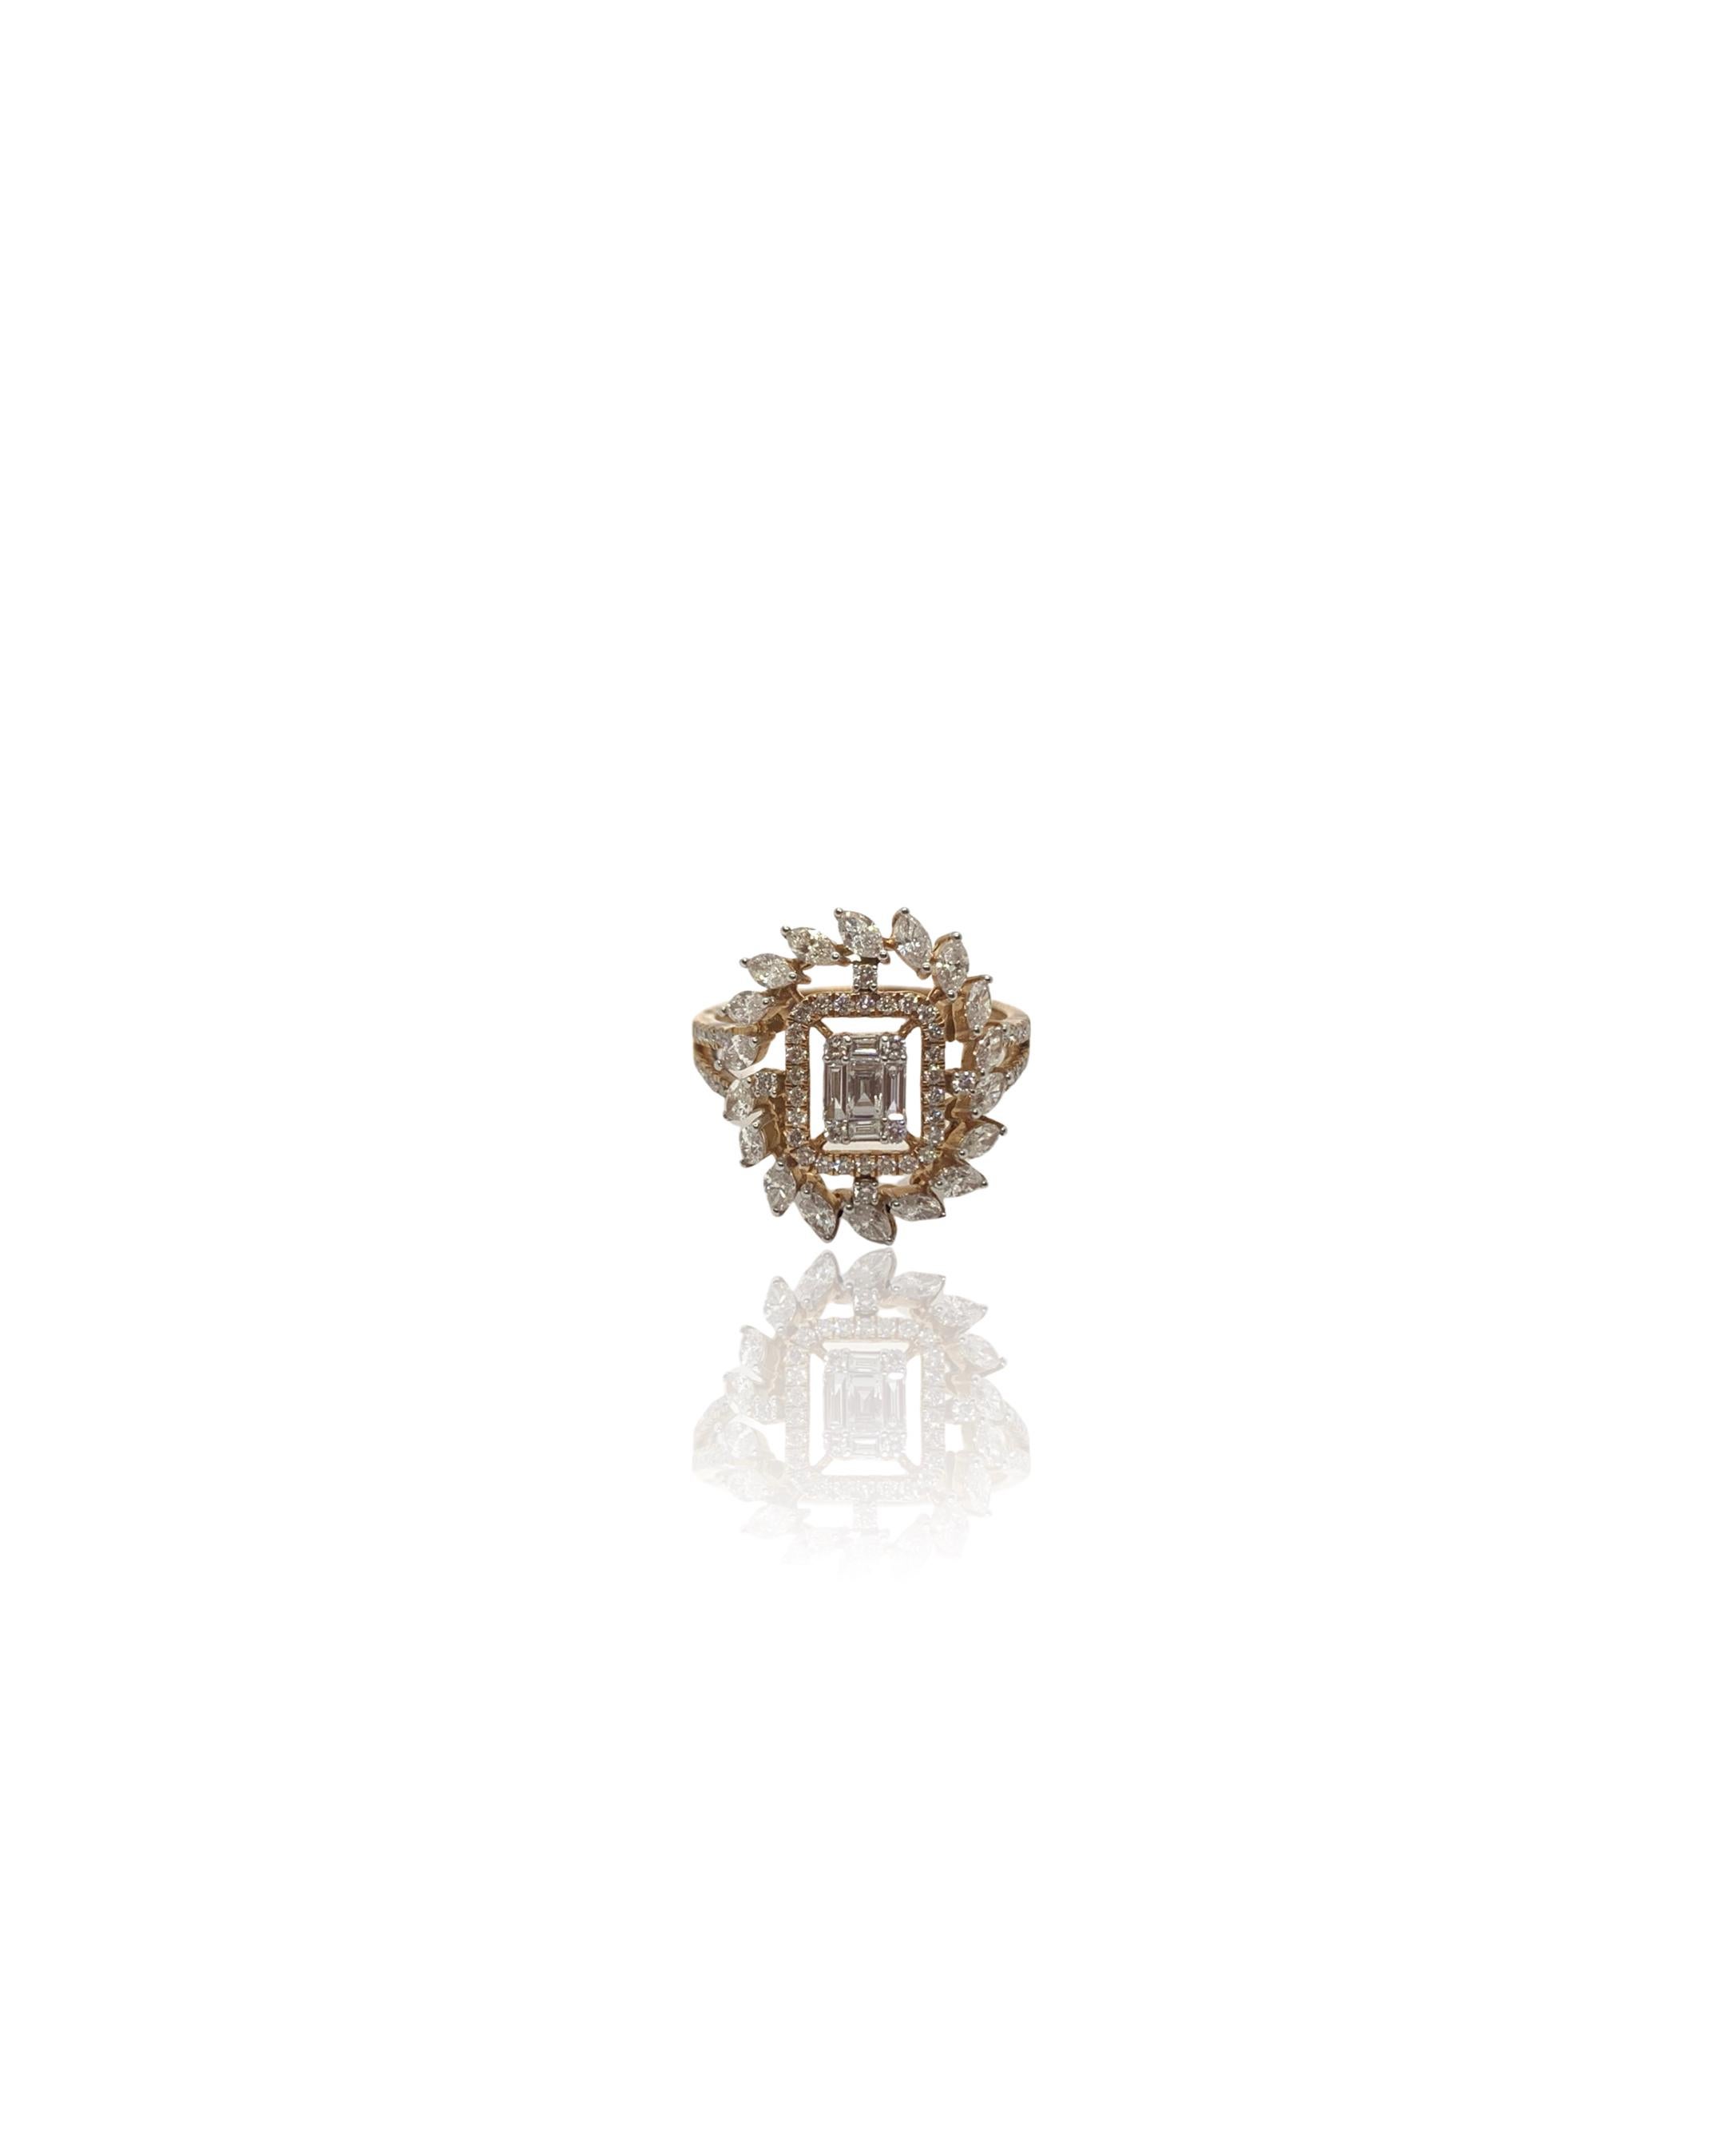 An elegant ring with a cluster setting Diamond Emerald cut in the centre, with rows of round and Marquise diamonds around. The ring is made in 18K Rose Gold. The diamonds are all high quality and white. 
The ring is ideal as a gift for your loved